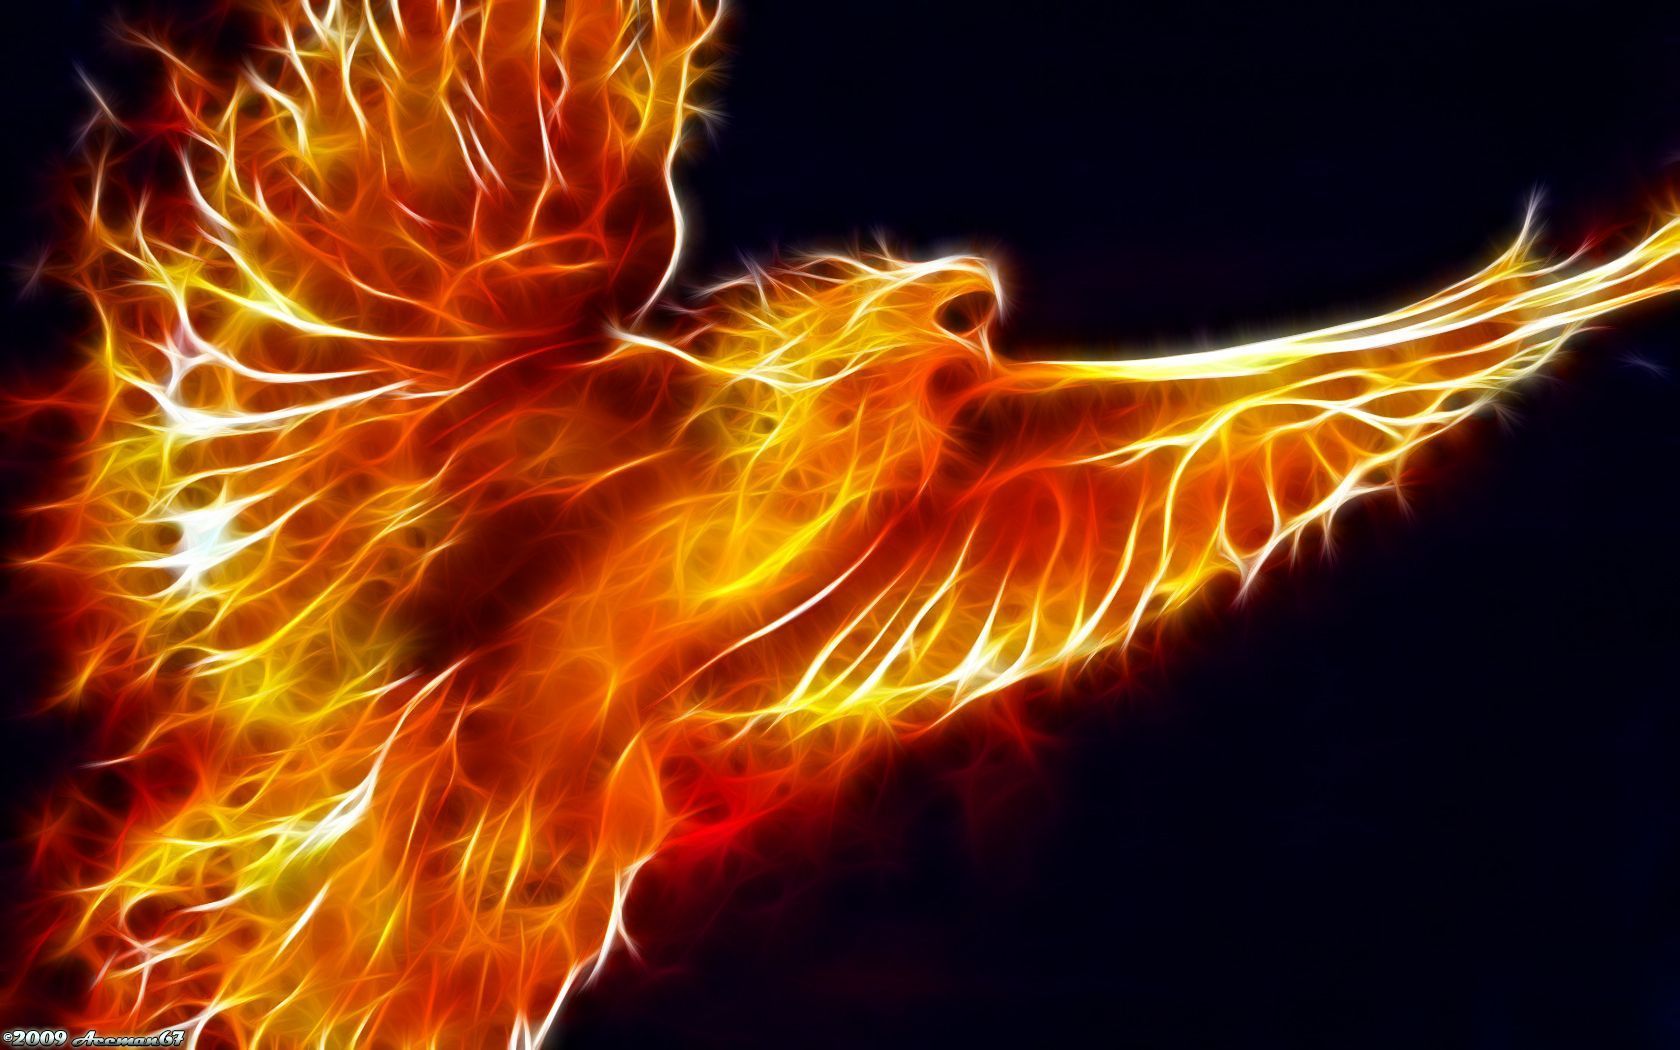 Fire latest hd wallpaper | Only hd wallpapers